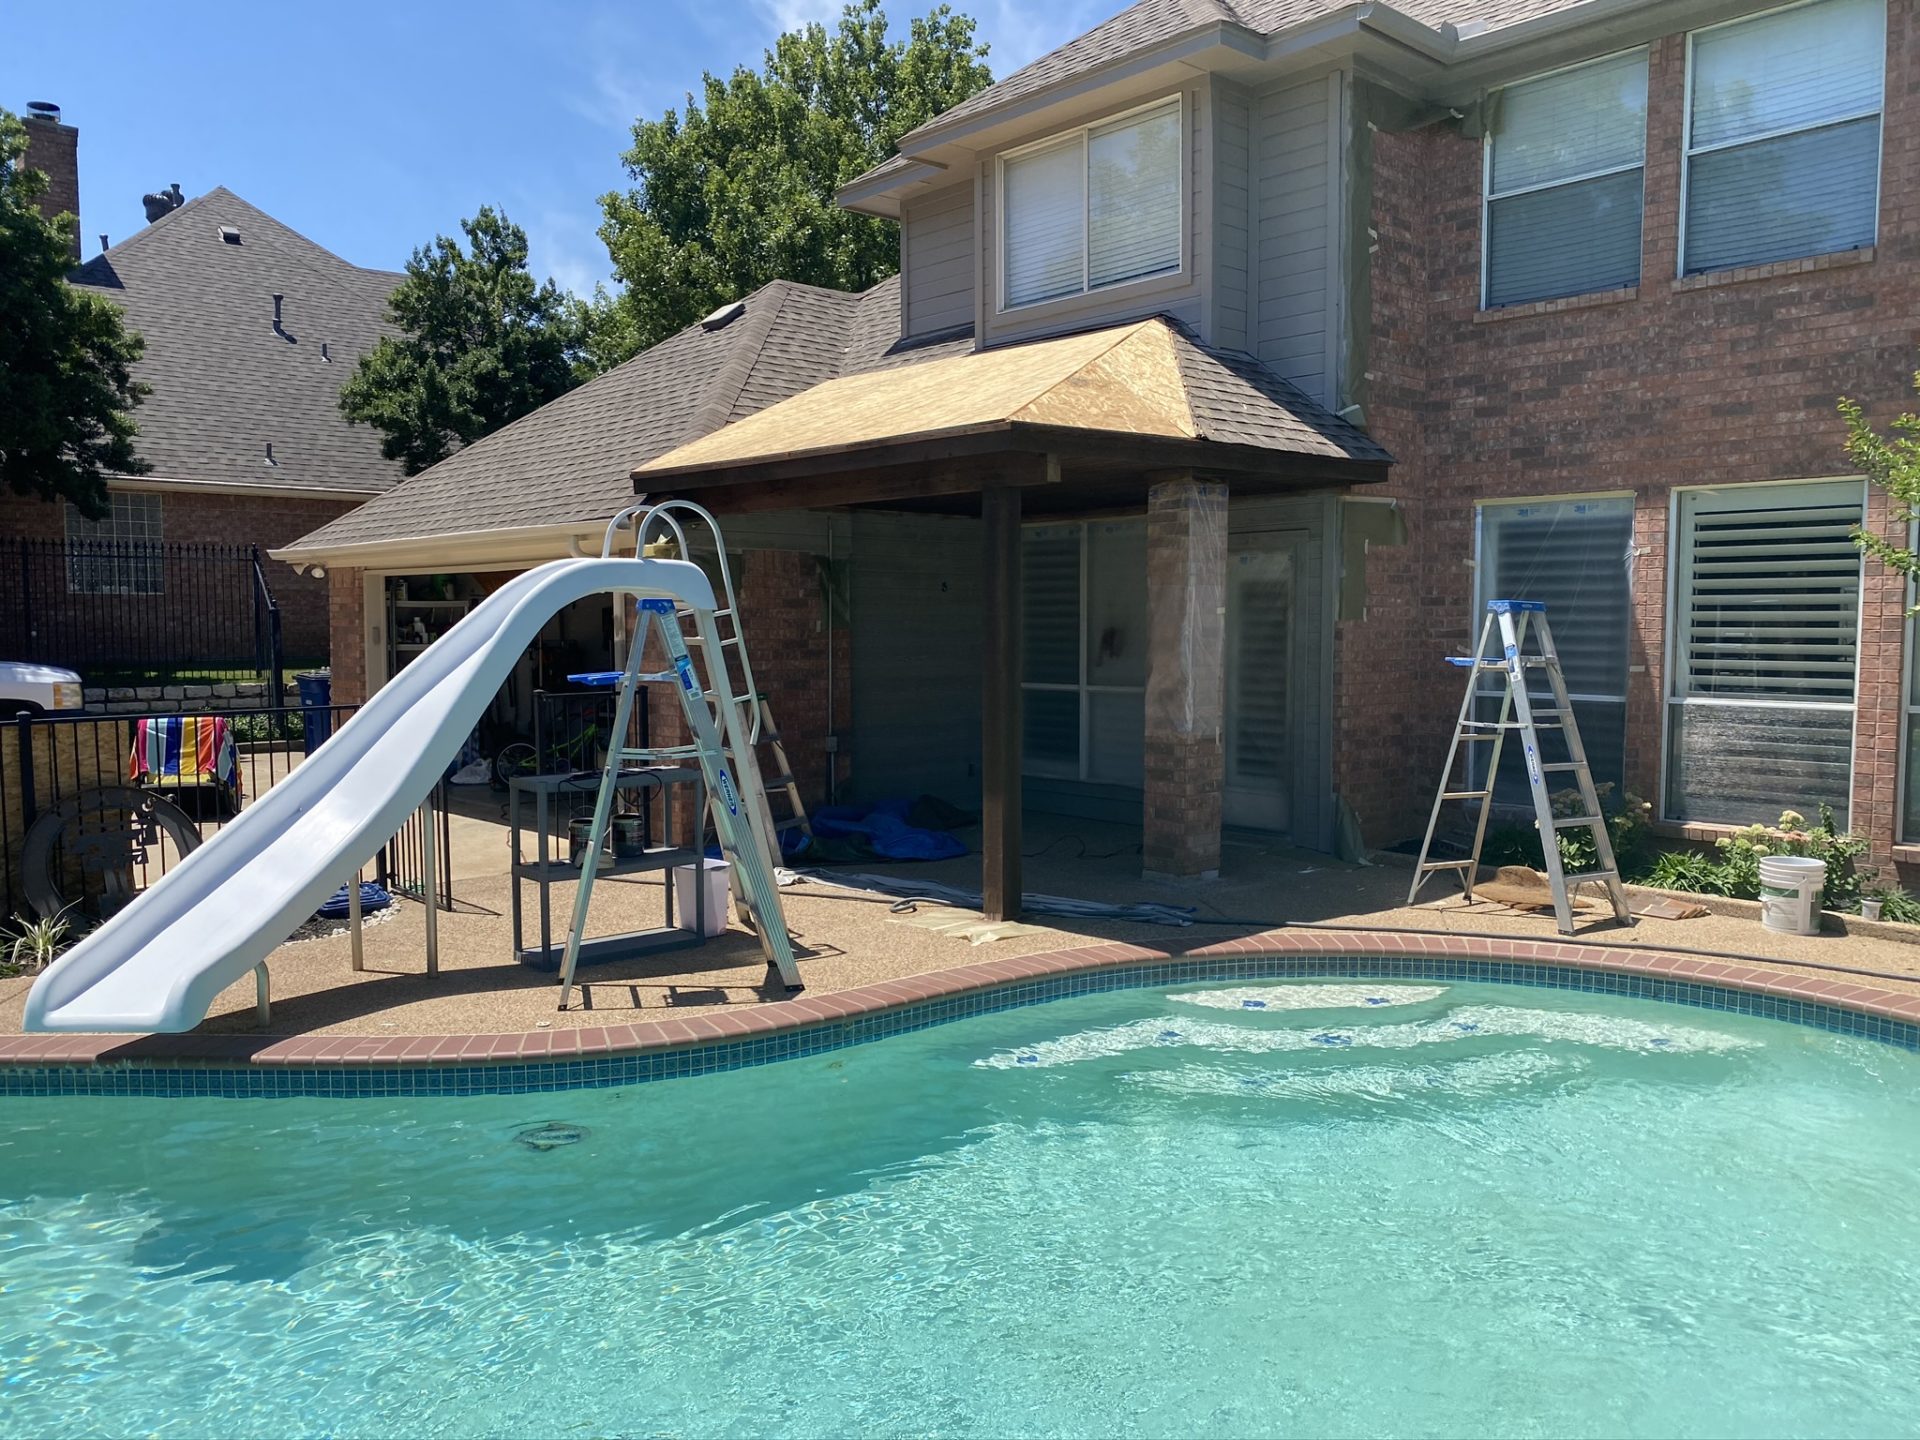 Home in Dallas-Fort Worth Texas, showing the backyard area with pool and extended roof cover built by Jenkins Roofing.